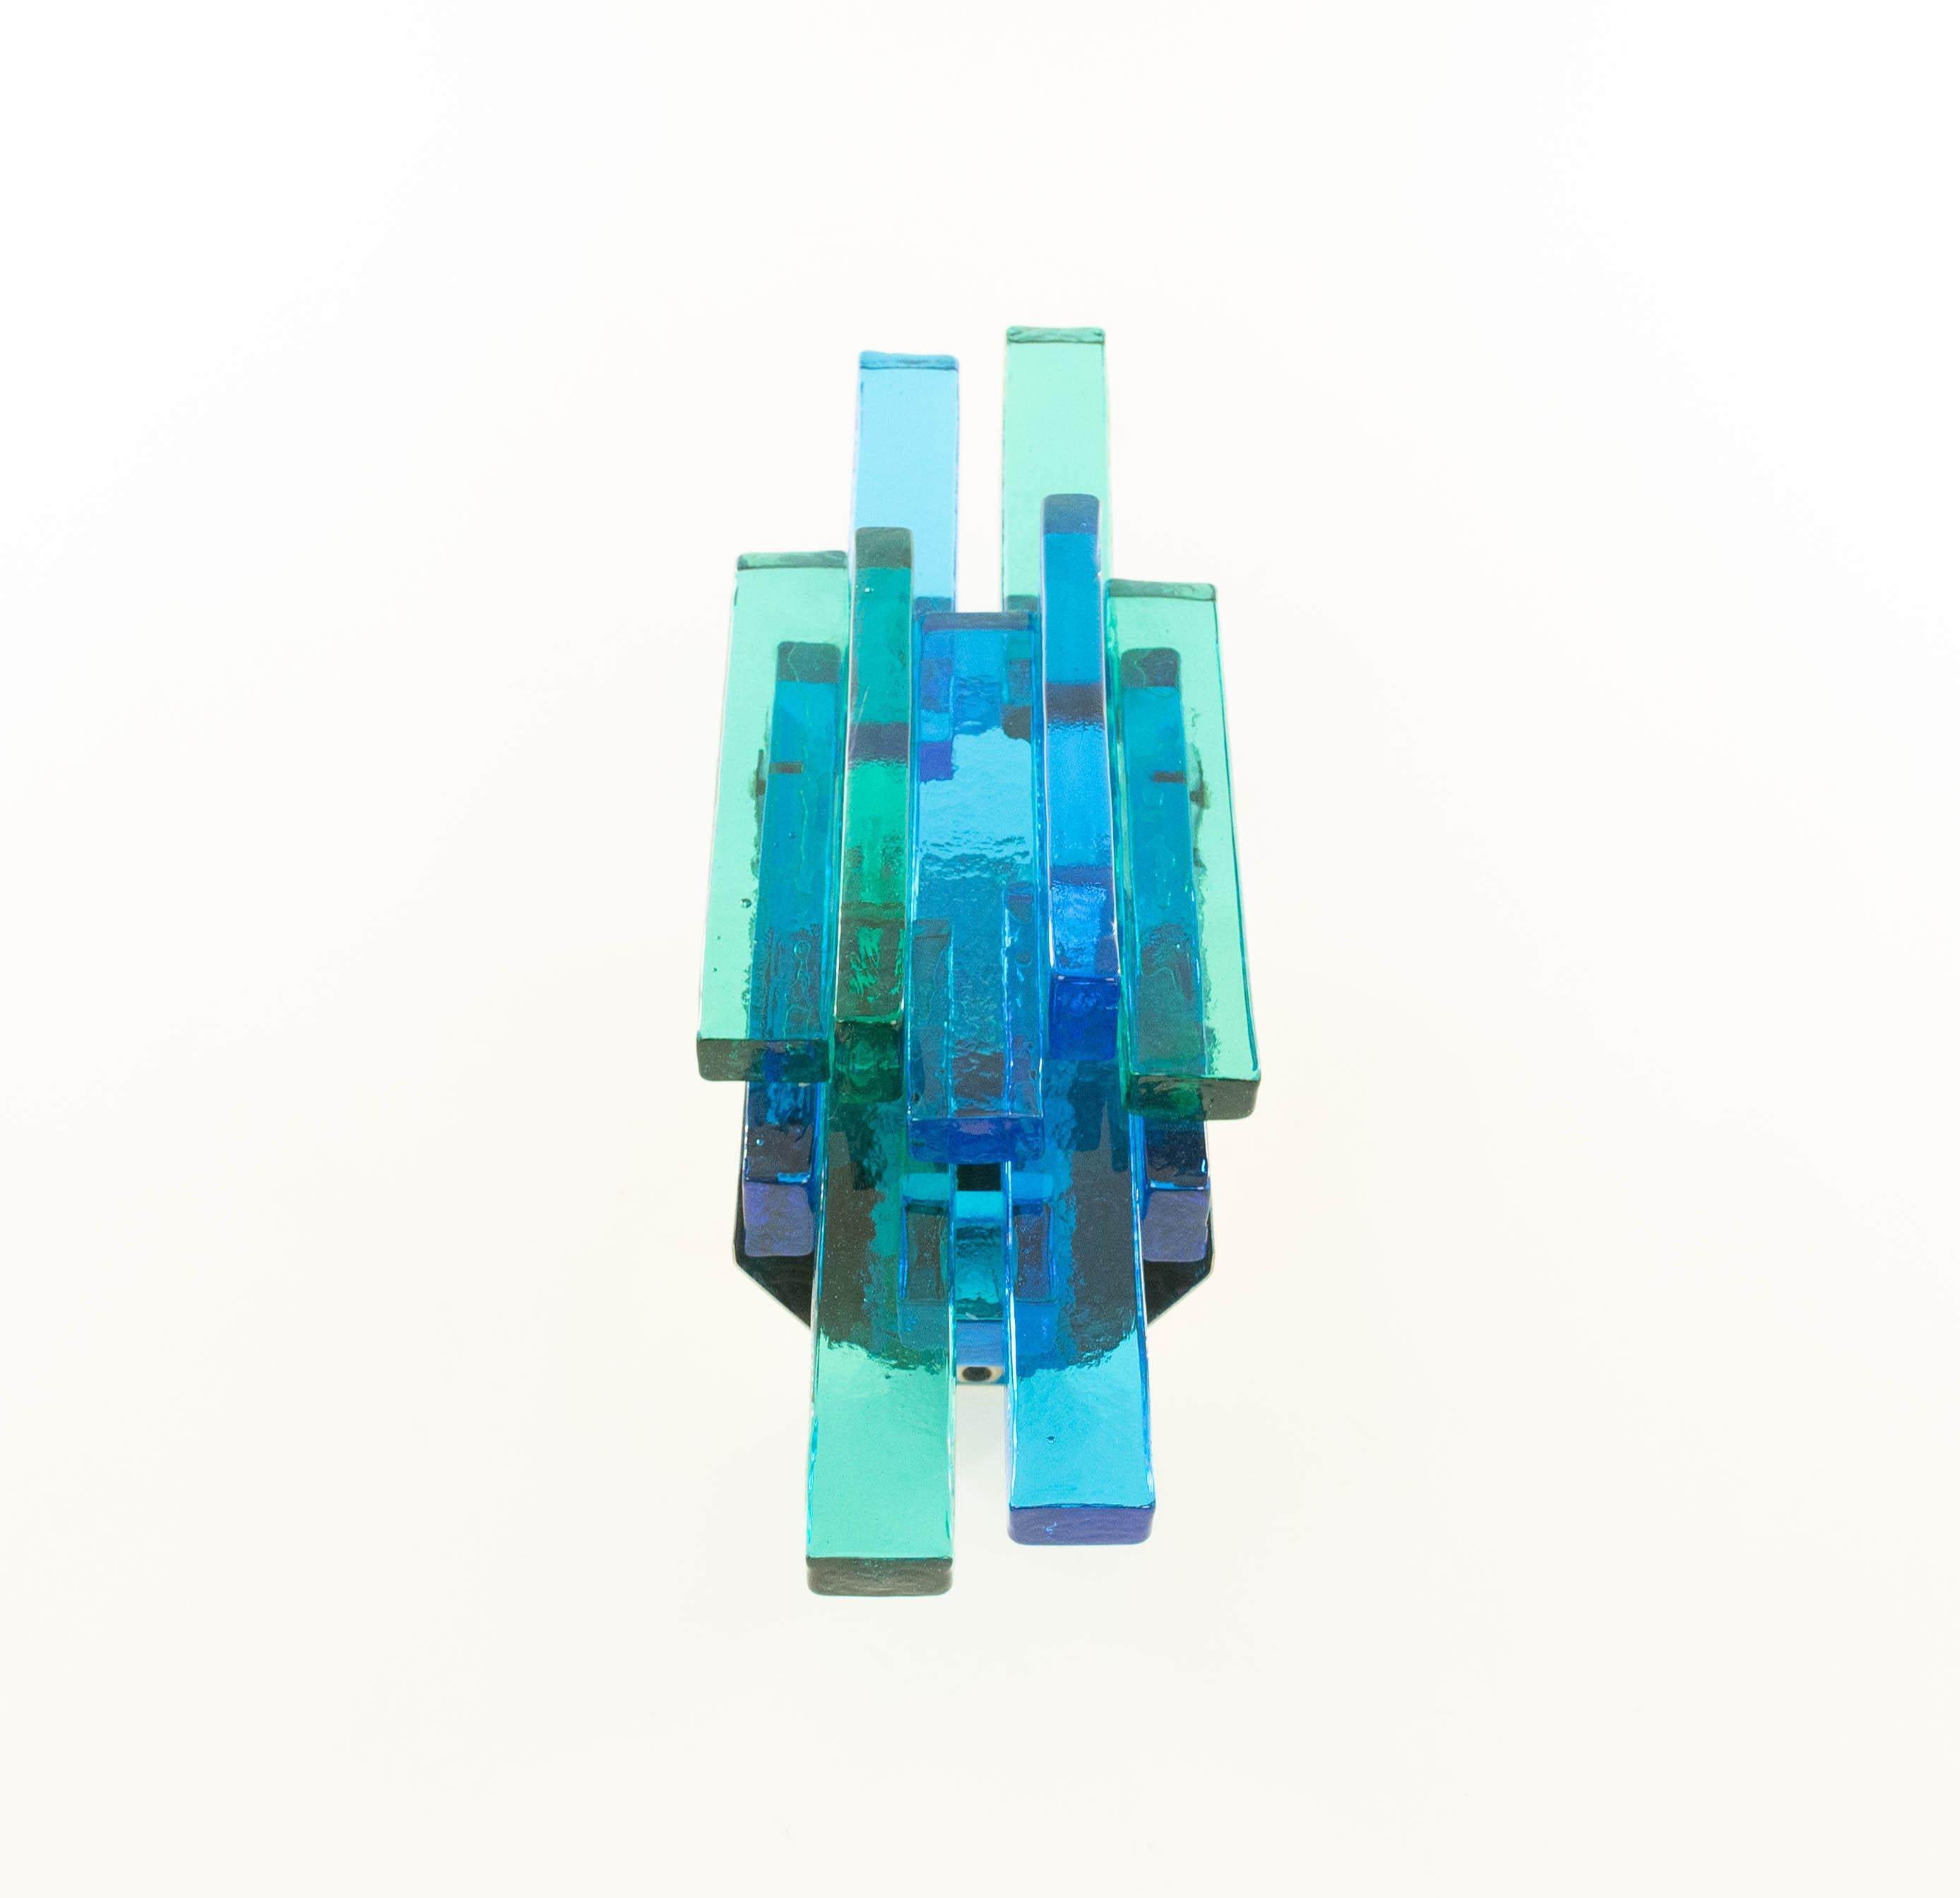 Mid-Century Modern Blue Glass Skulptur Lampet Wall Lamp by Svend Aage Holm Sørensen, 1960s For Sale